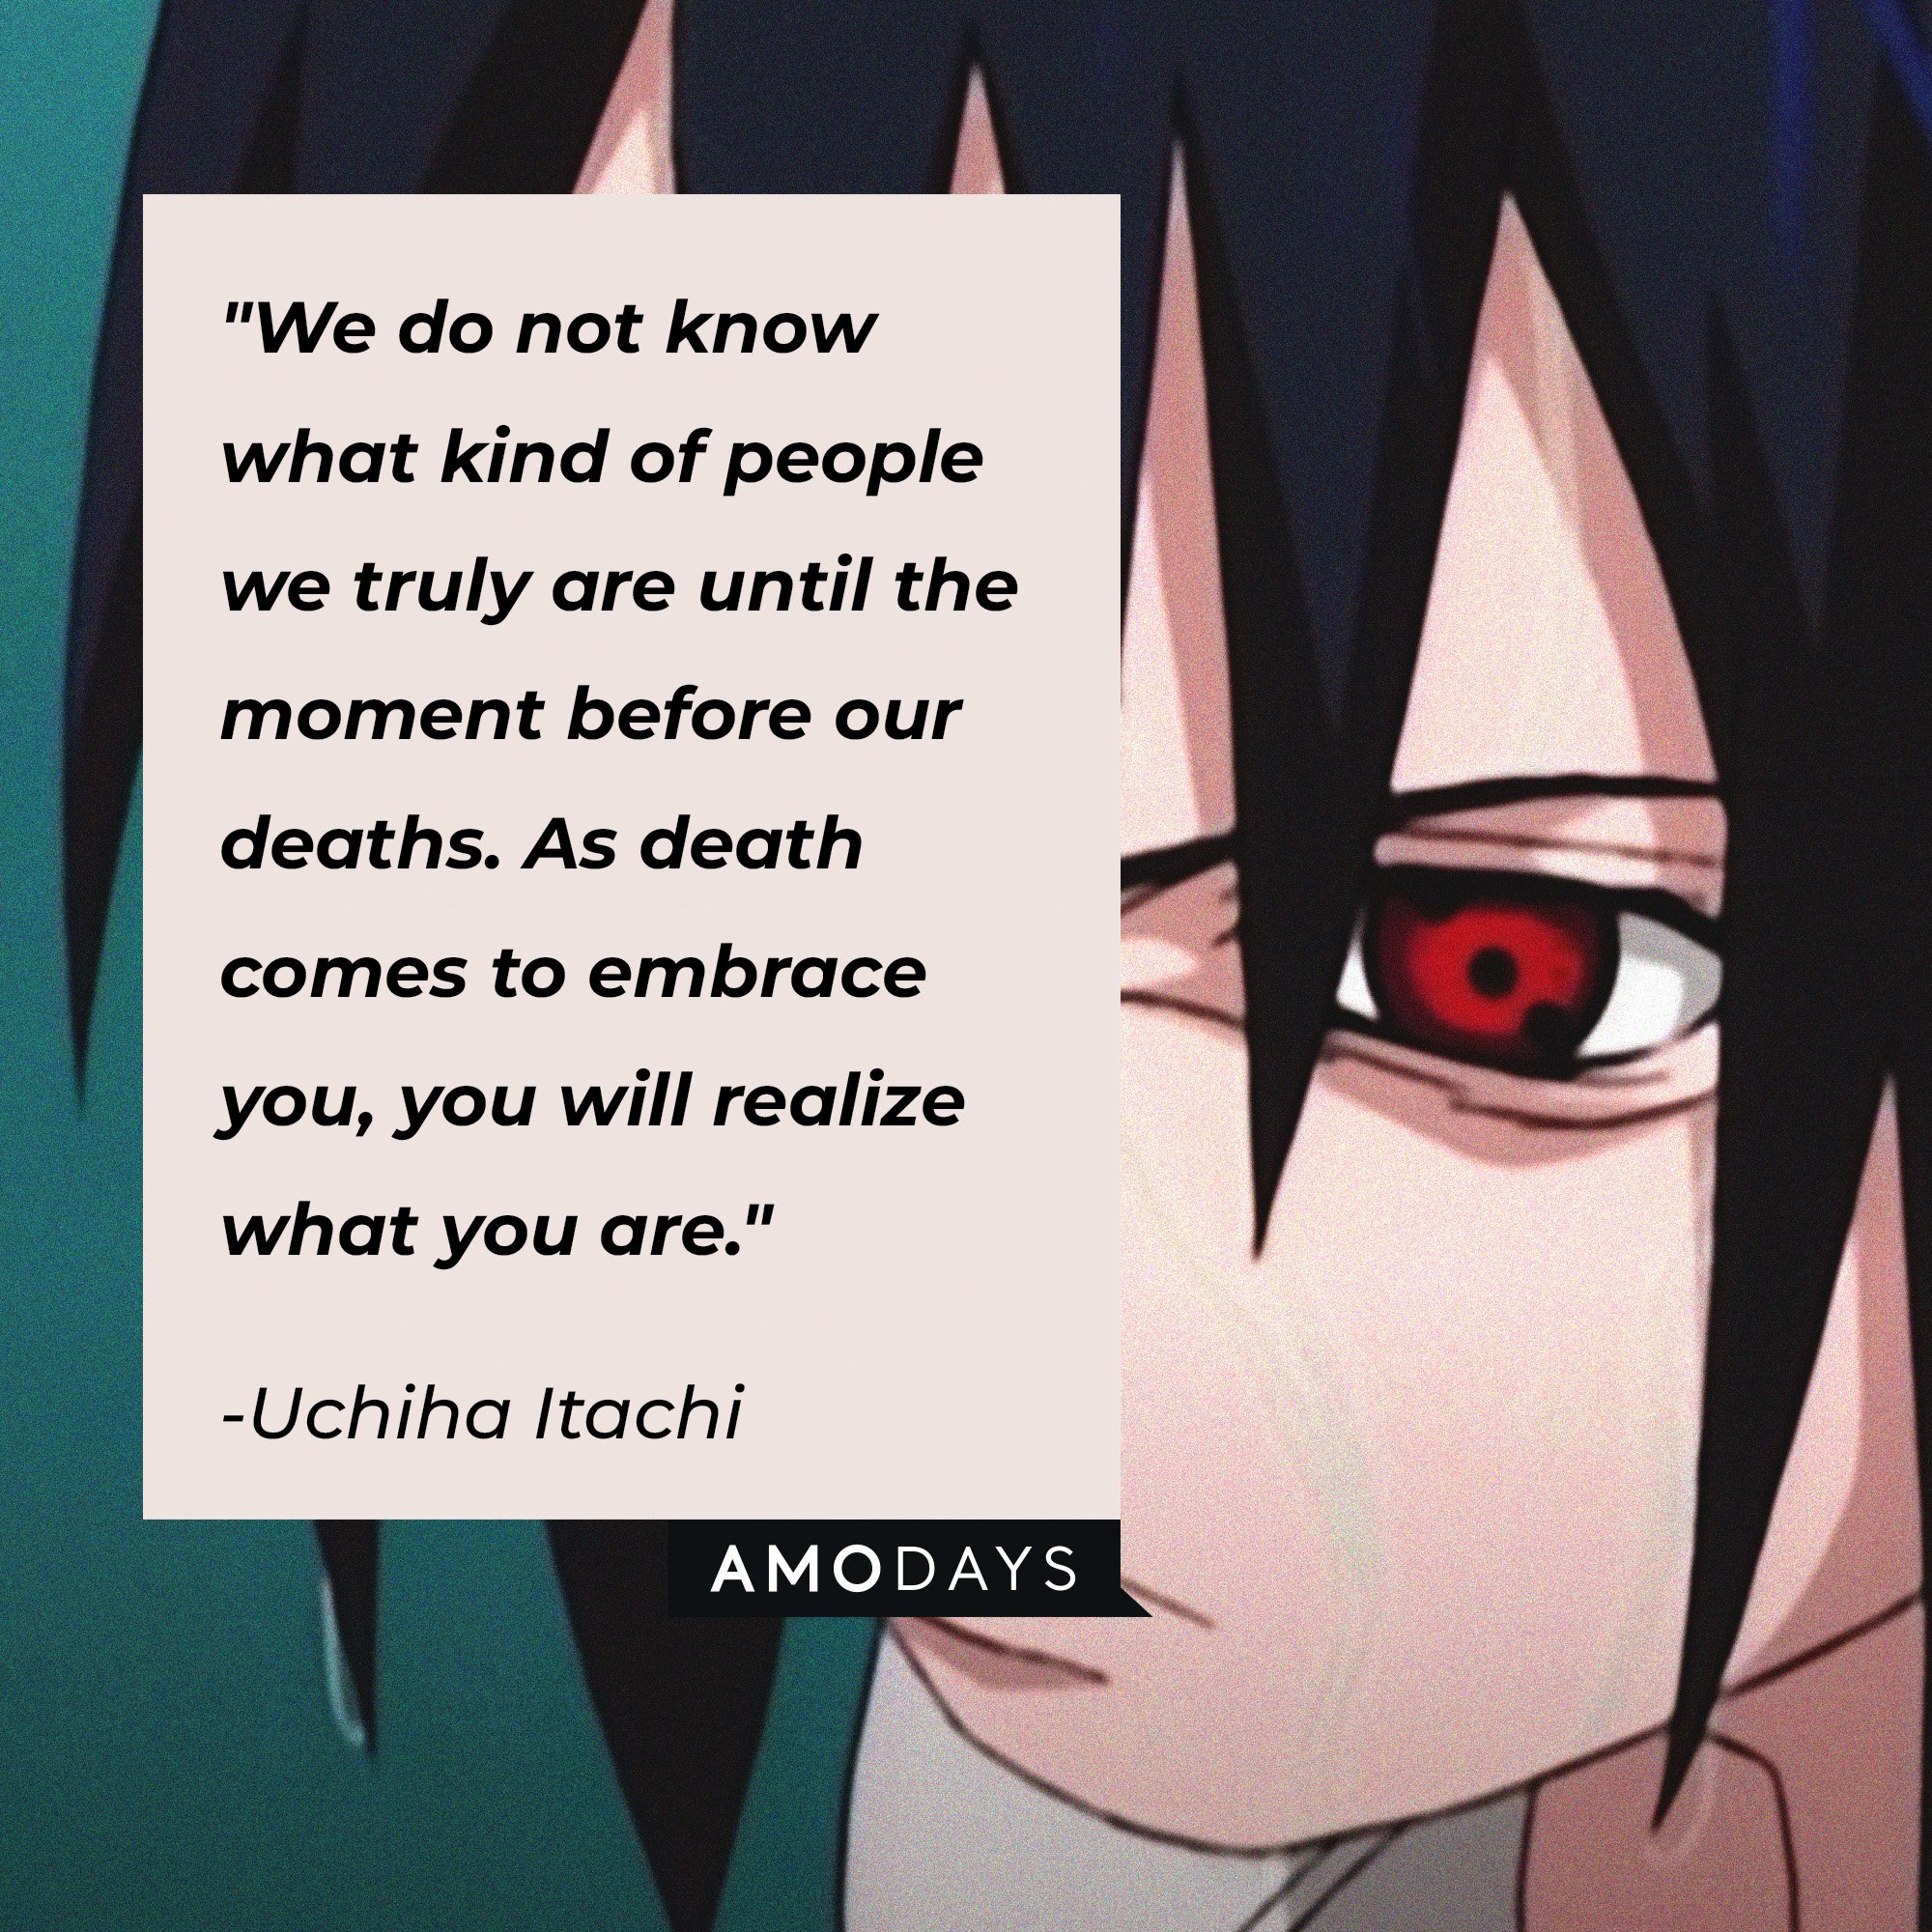 Uchiha Itachi's quote: "We do not know what kind of people we truly are until the moment before our deaths. As death comes to embrace you, you will realize what you are." | Image: AmoDays